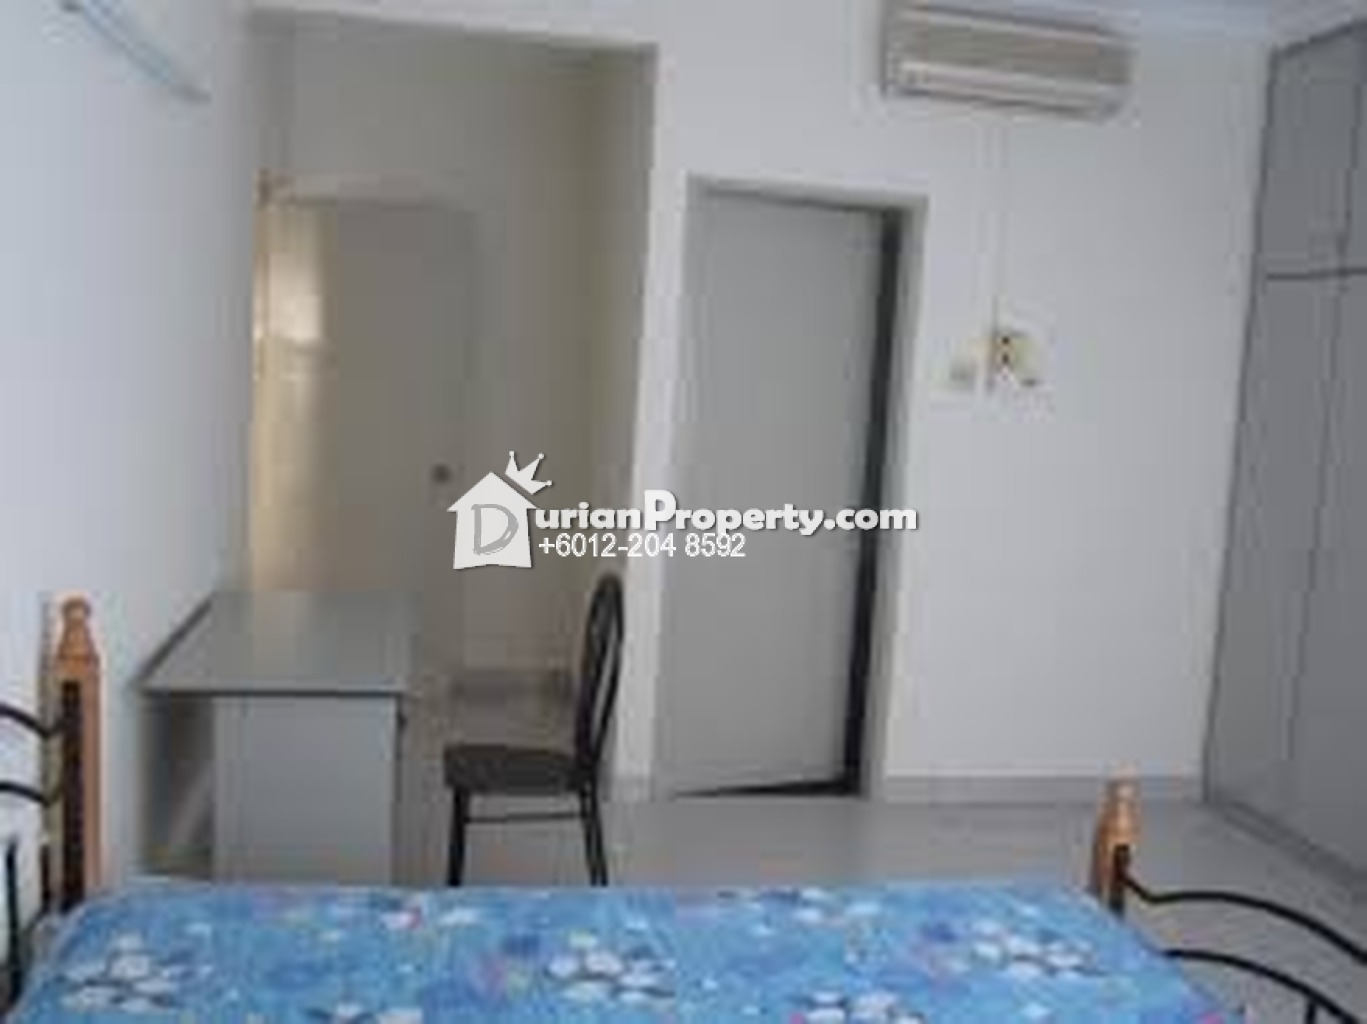 Condo Room For Rent At Indah Villa Bandar Sunway For Rm 500 By Hsin Soo Durianproperty